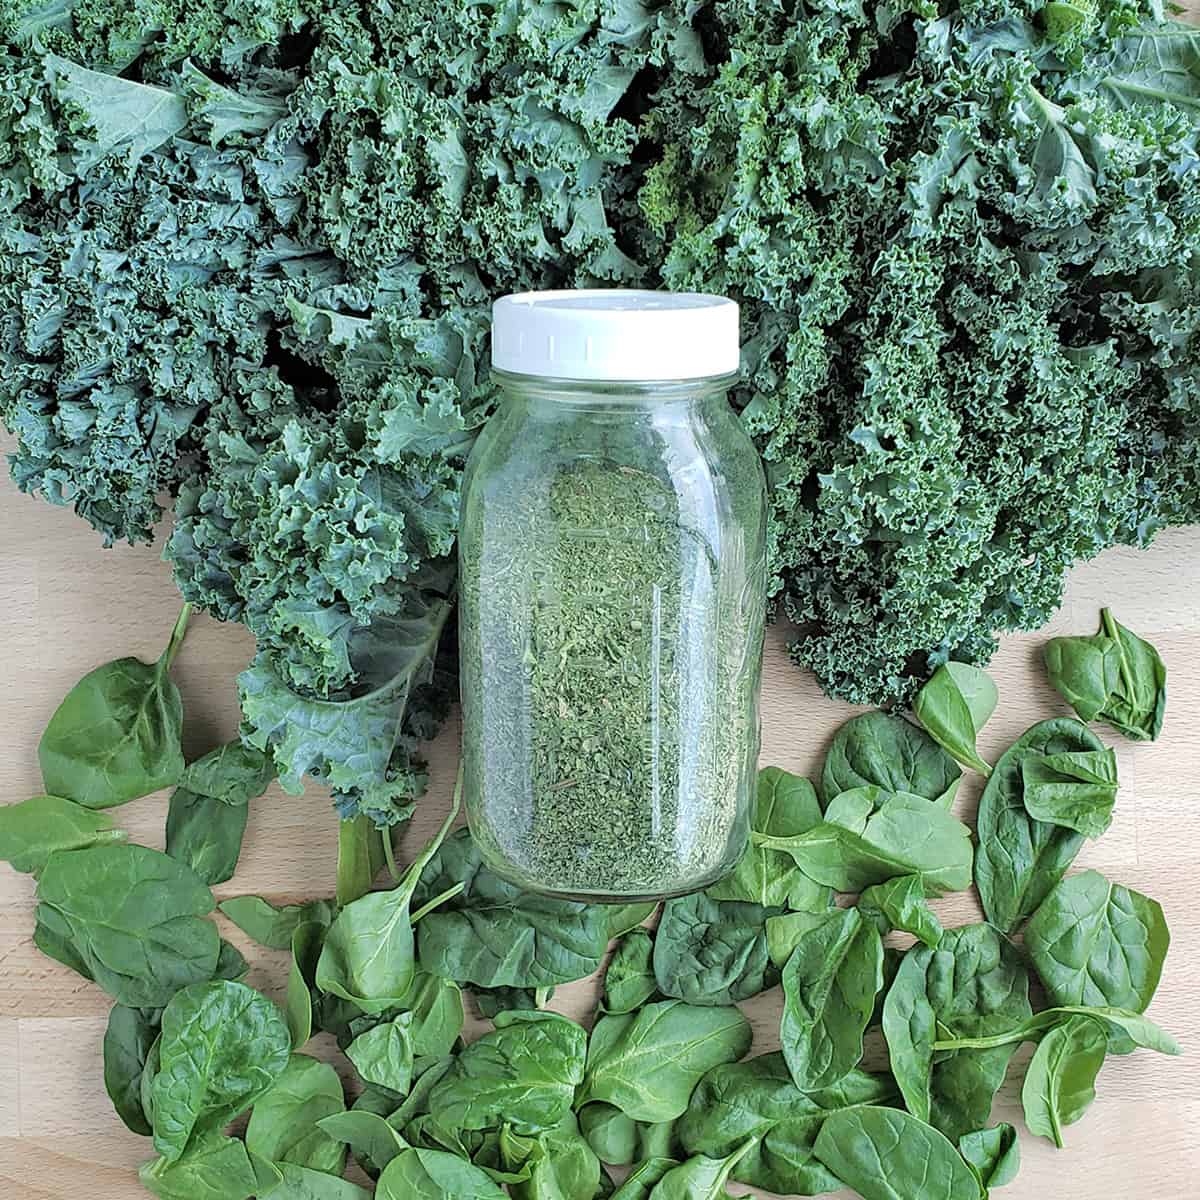 DIY Homemade Green Powder from Dehydrated Greens